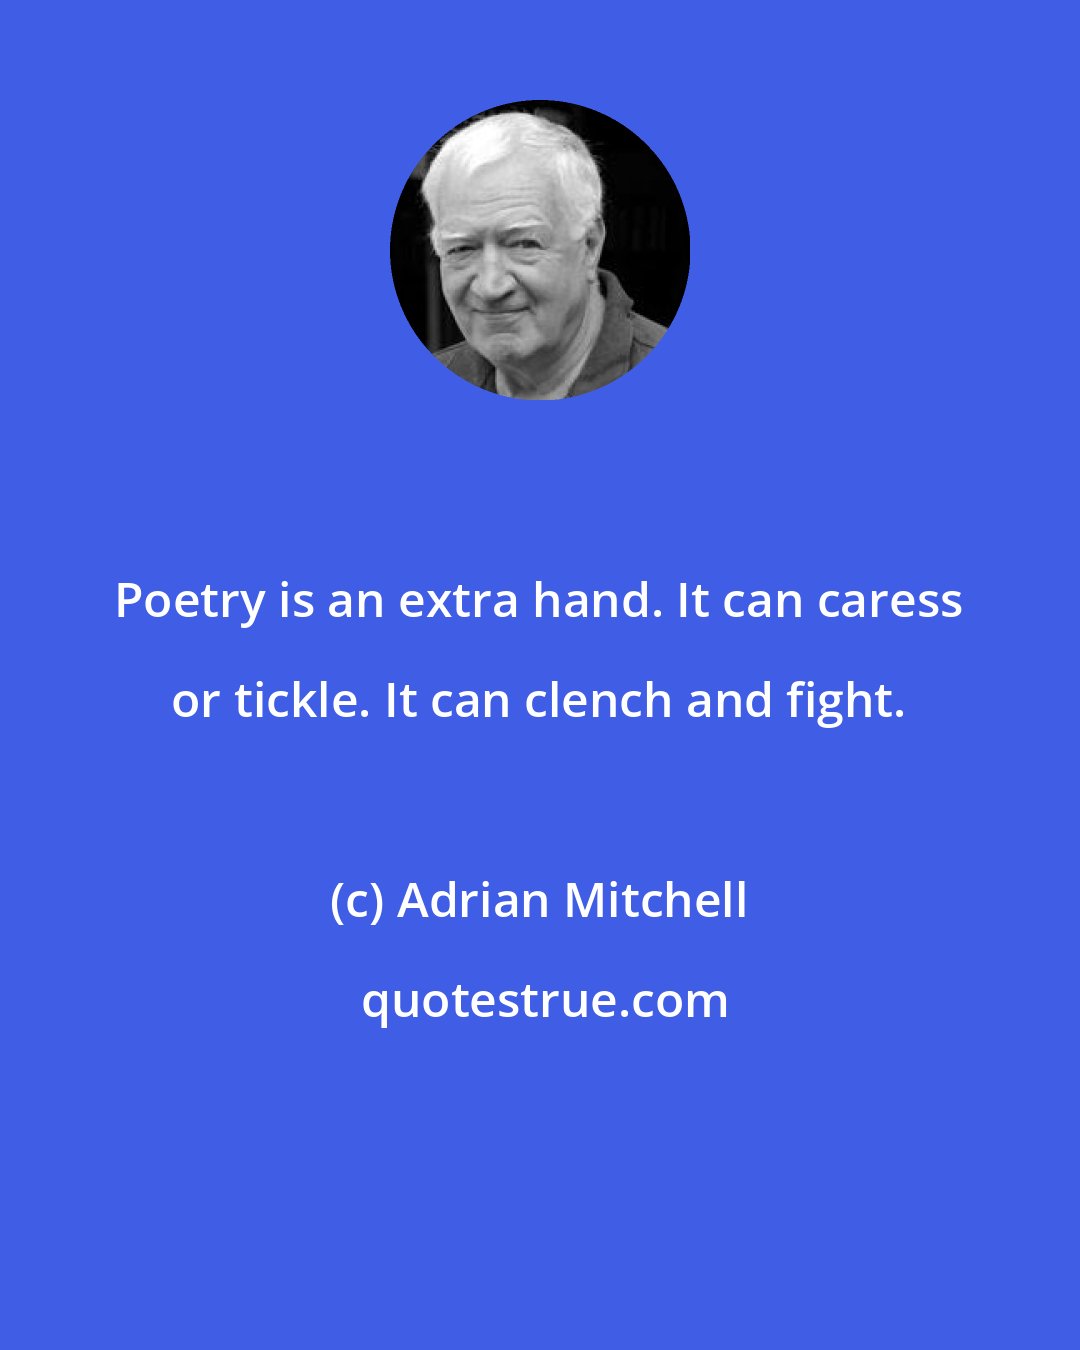 Adrian Mitchell: Poetry is an extra hand. It can caress or tickle. It can clench and fight.